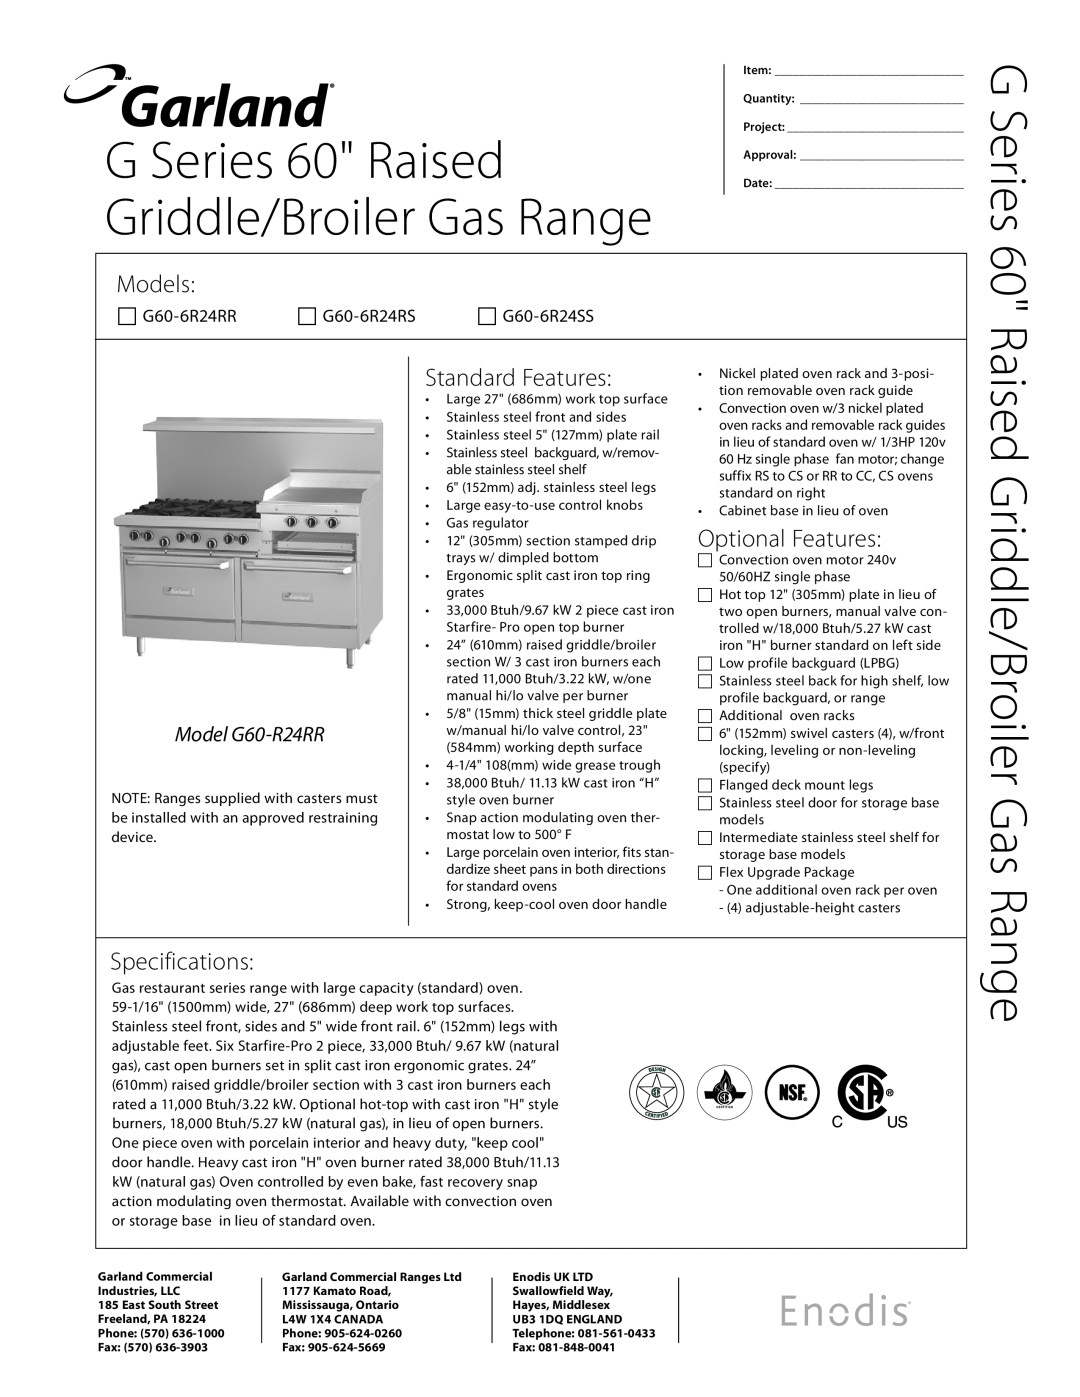 Garland specifications G Series 60 Raised, Griddle/Broiler Gas Range, Raised Griddle/Broiler Gas, Models 